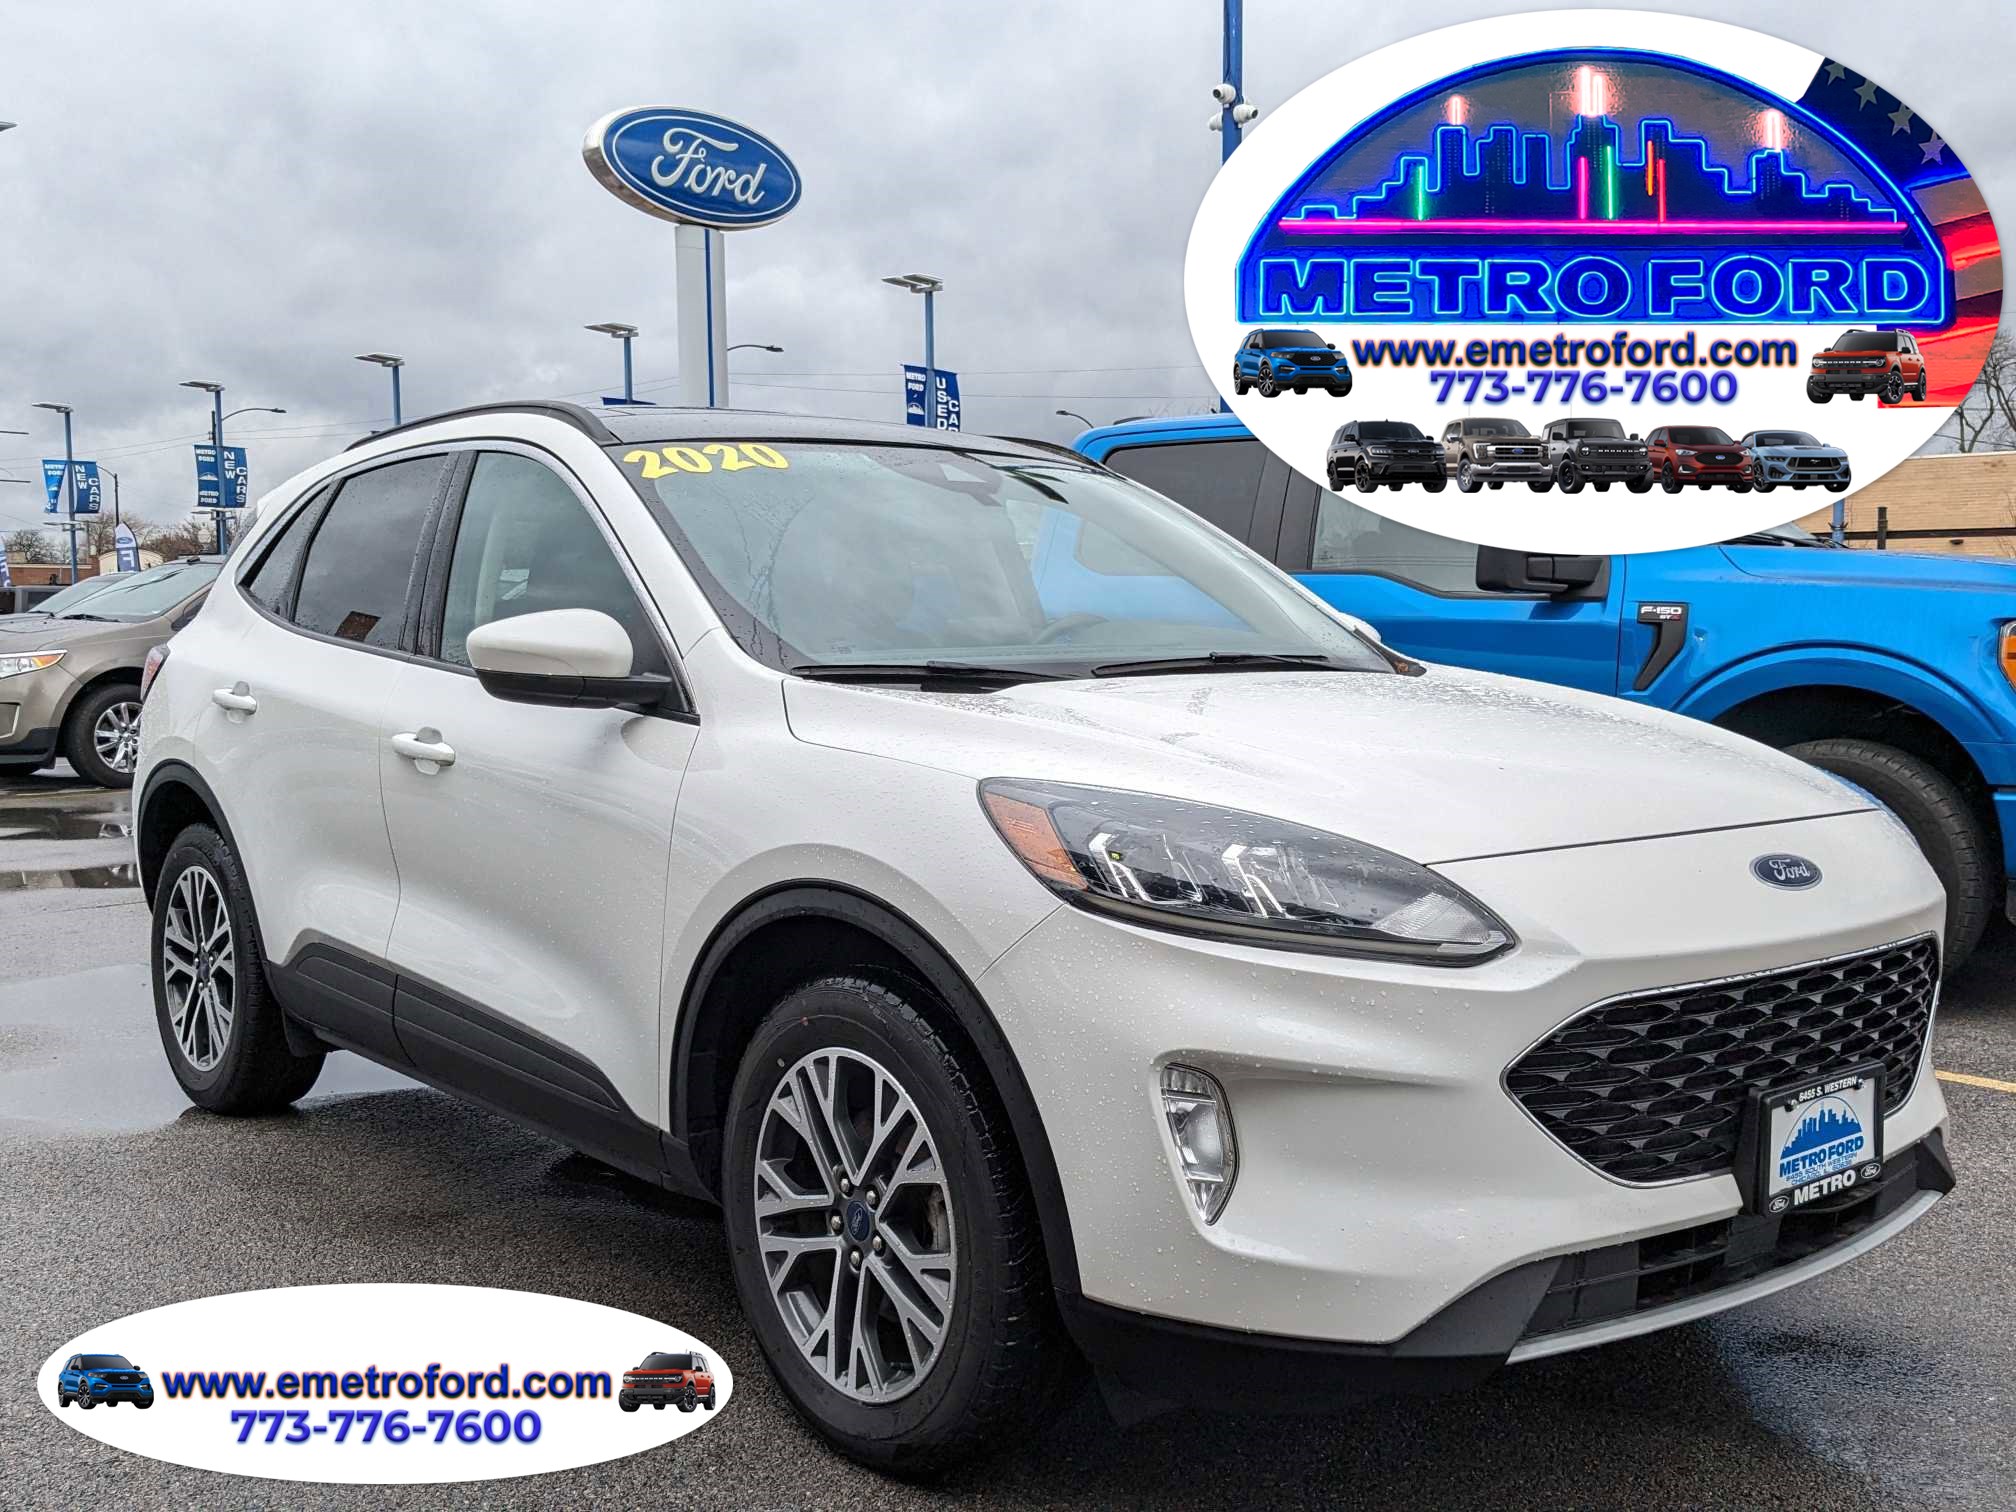 2020 Ford Escape SEL SUV For Sale Chicago- Used SUV For Sale Chicago 60636